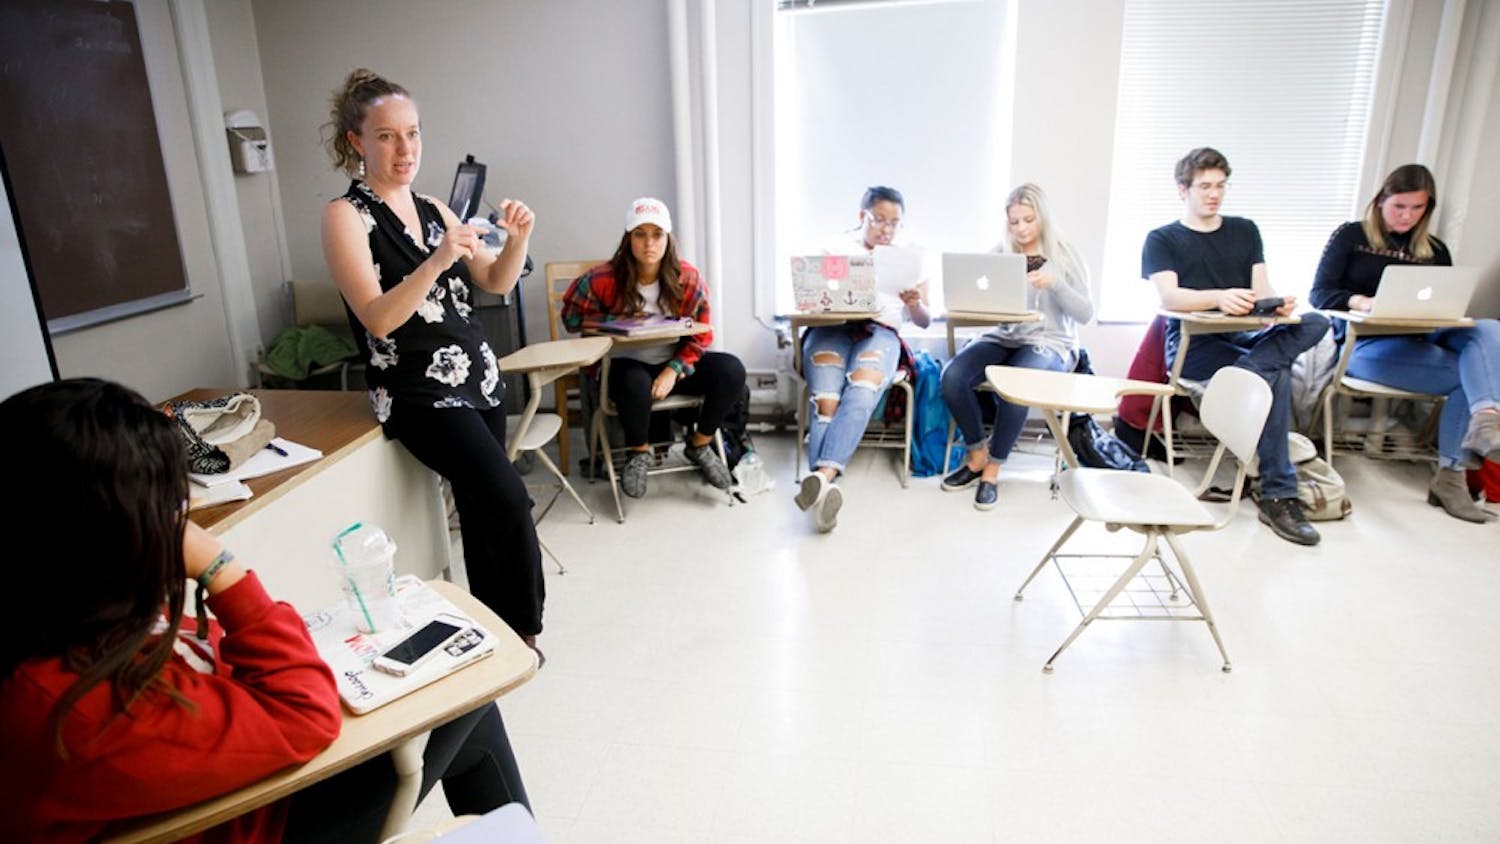 Jennie Gubner, visiting lecturer in the Department of Folklore and Ethnomusicology at IU, talks with her students during class. Her service learning course pairs students with older adults who have Alzheimer's and uses music to try and help them.